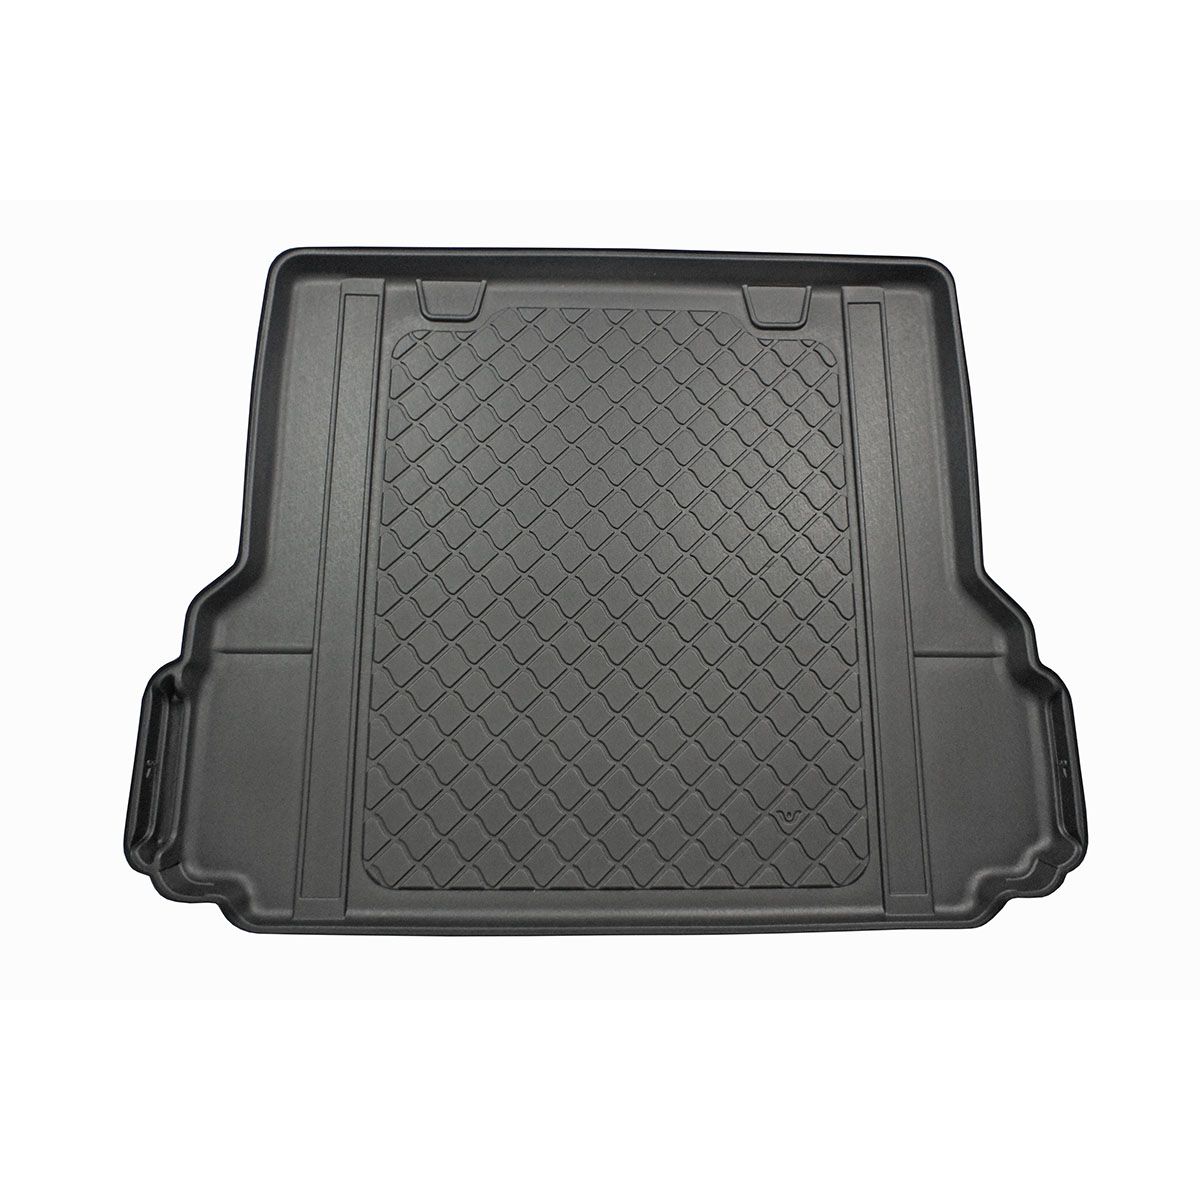 BMW 5 Series Touring 2017 - Onwards (G31) Moulded Boot Mat product image